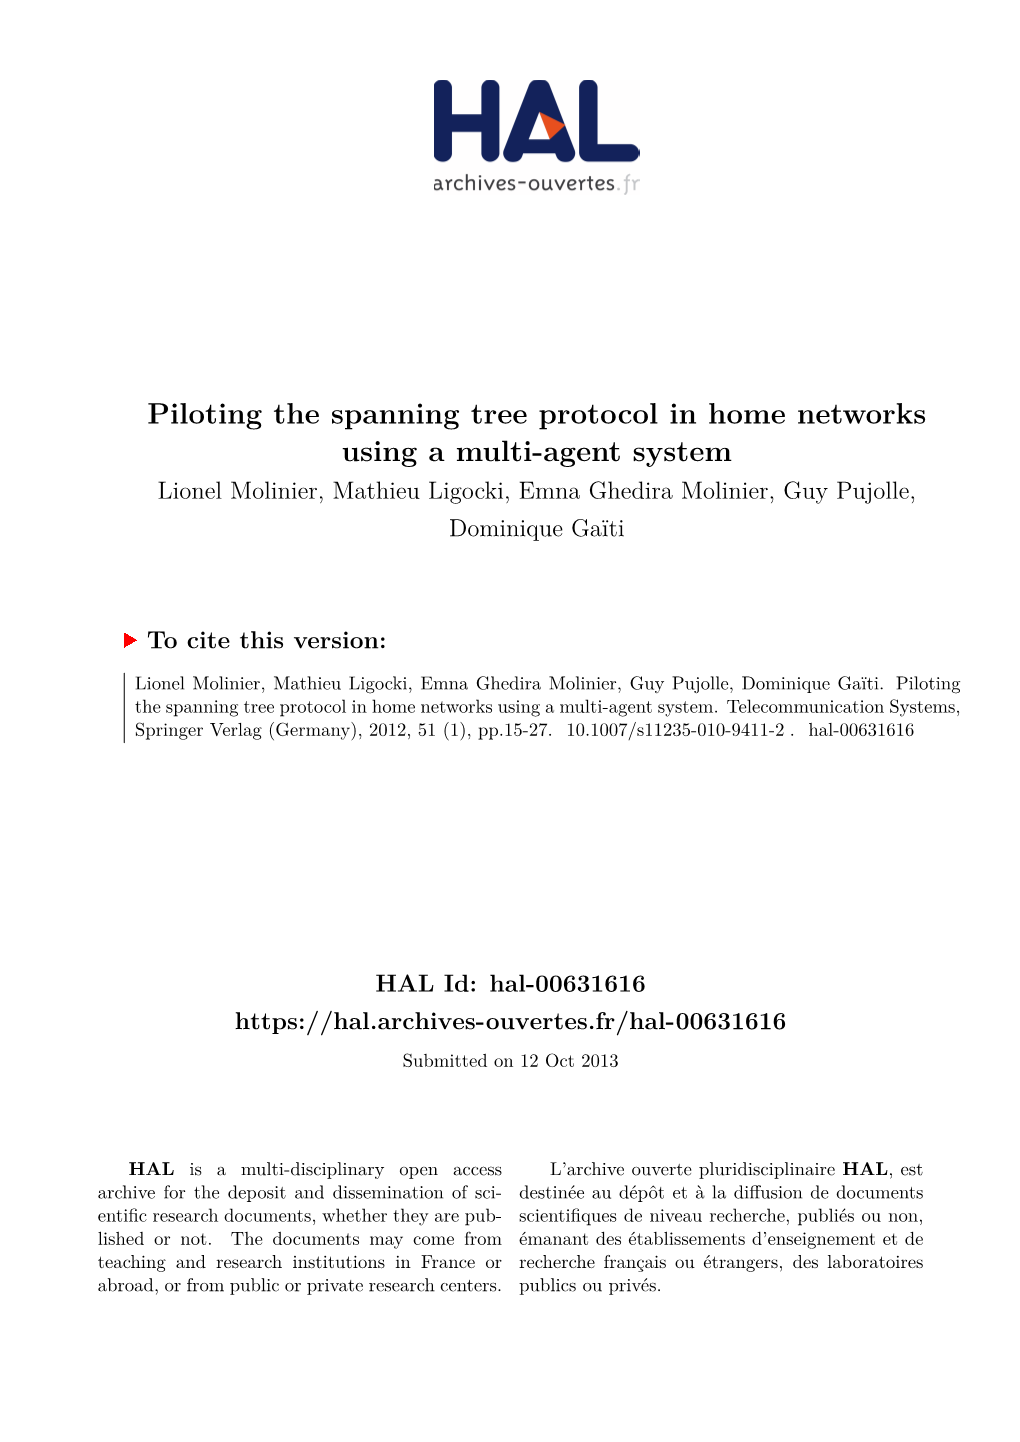 Piloting the Spanning Tree Protocol in Home Networks Using a Multi-Agent System Lionel Molinier, Mathieu Ligocki, Emna Ghedira Molinier, Guy Pujolle, Dominique Gaïti